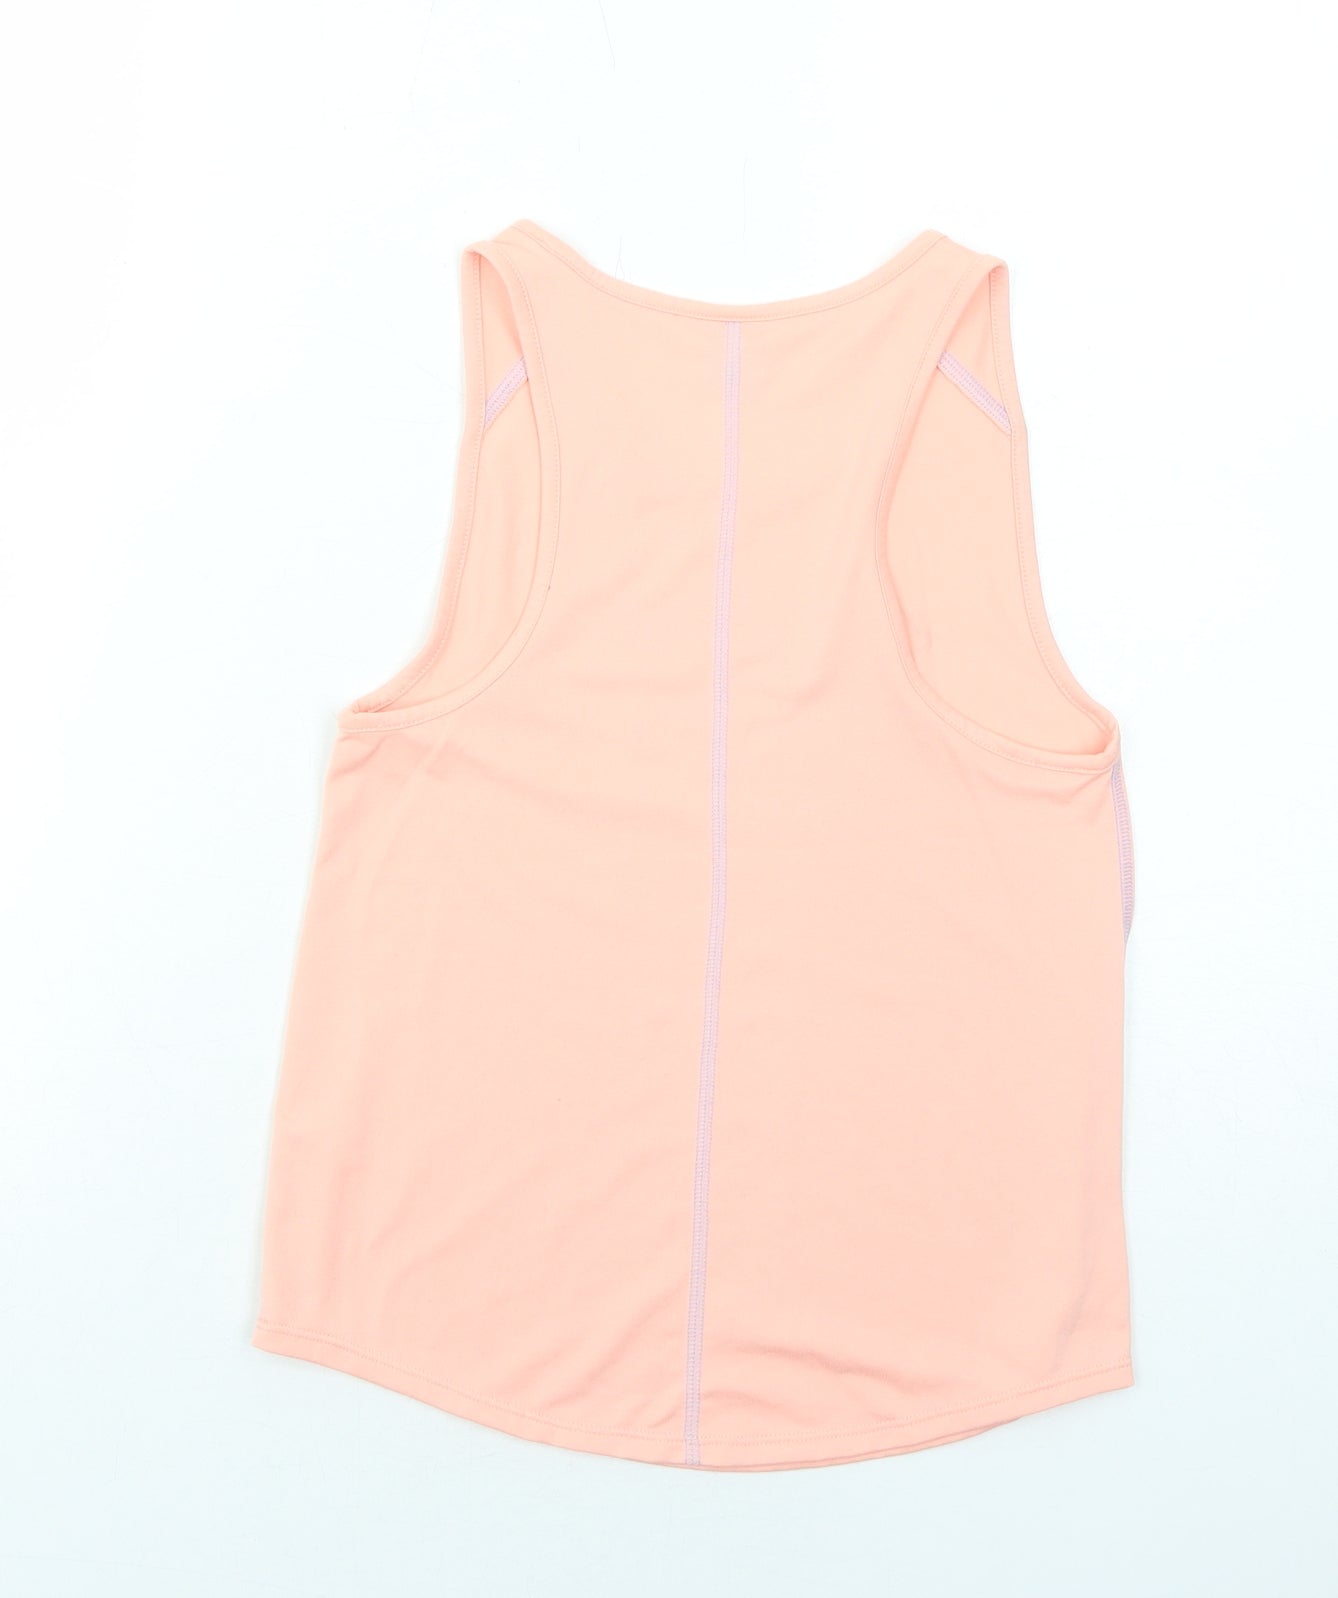 PUMA Girls Pink Cotton Basic Tank Size 9-10 Years Scoop Neck Pullover